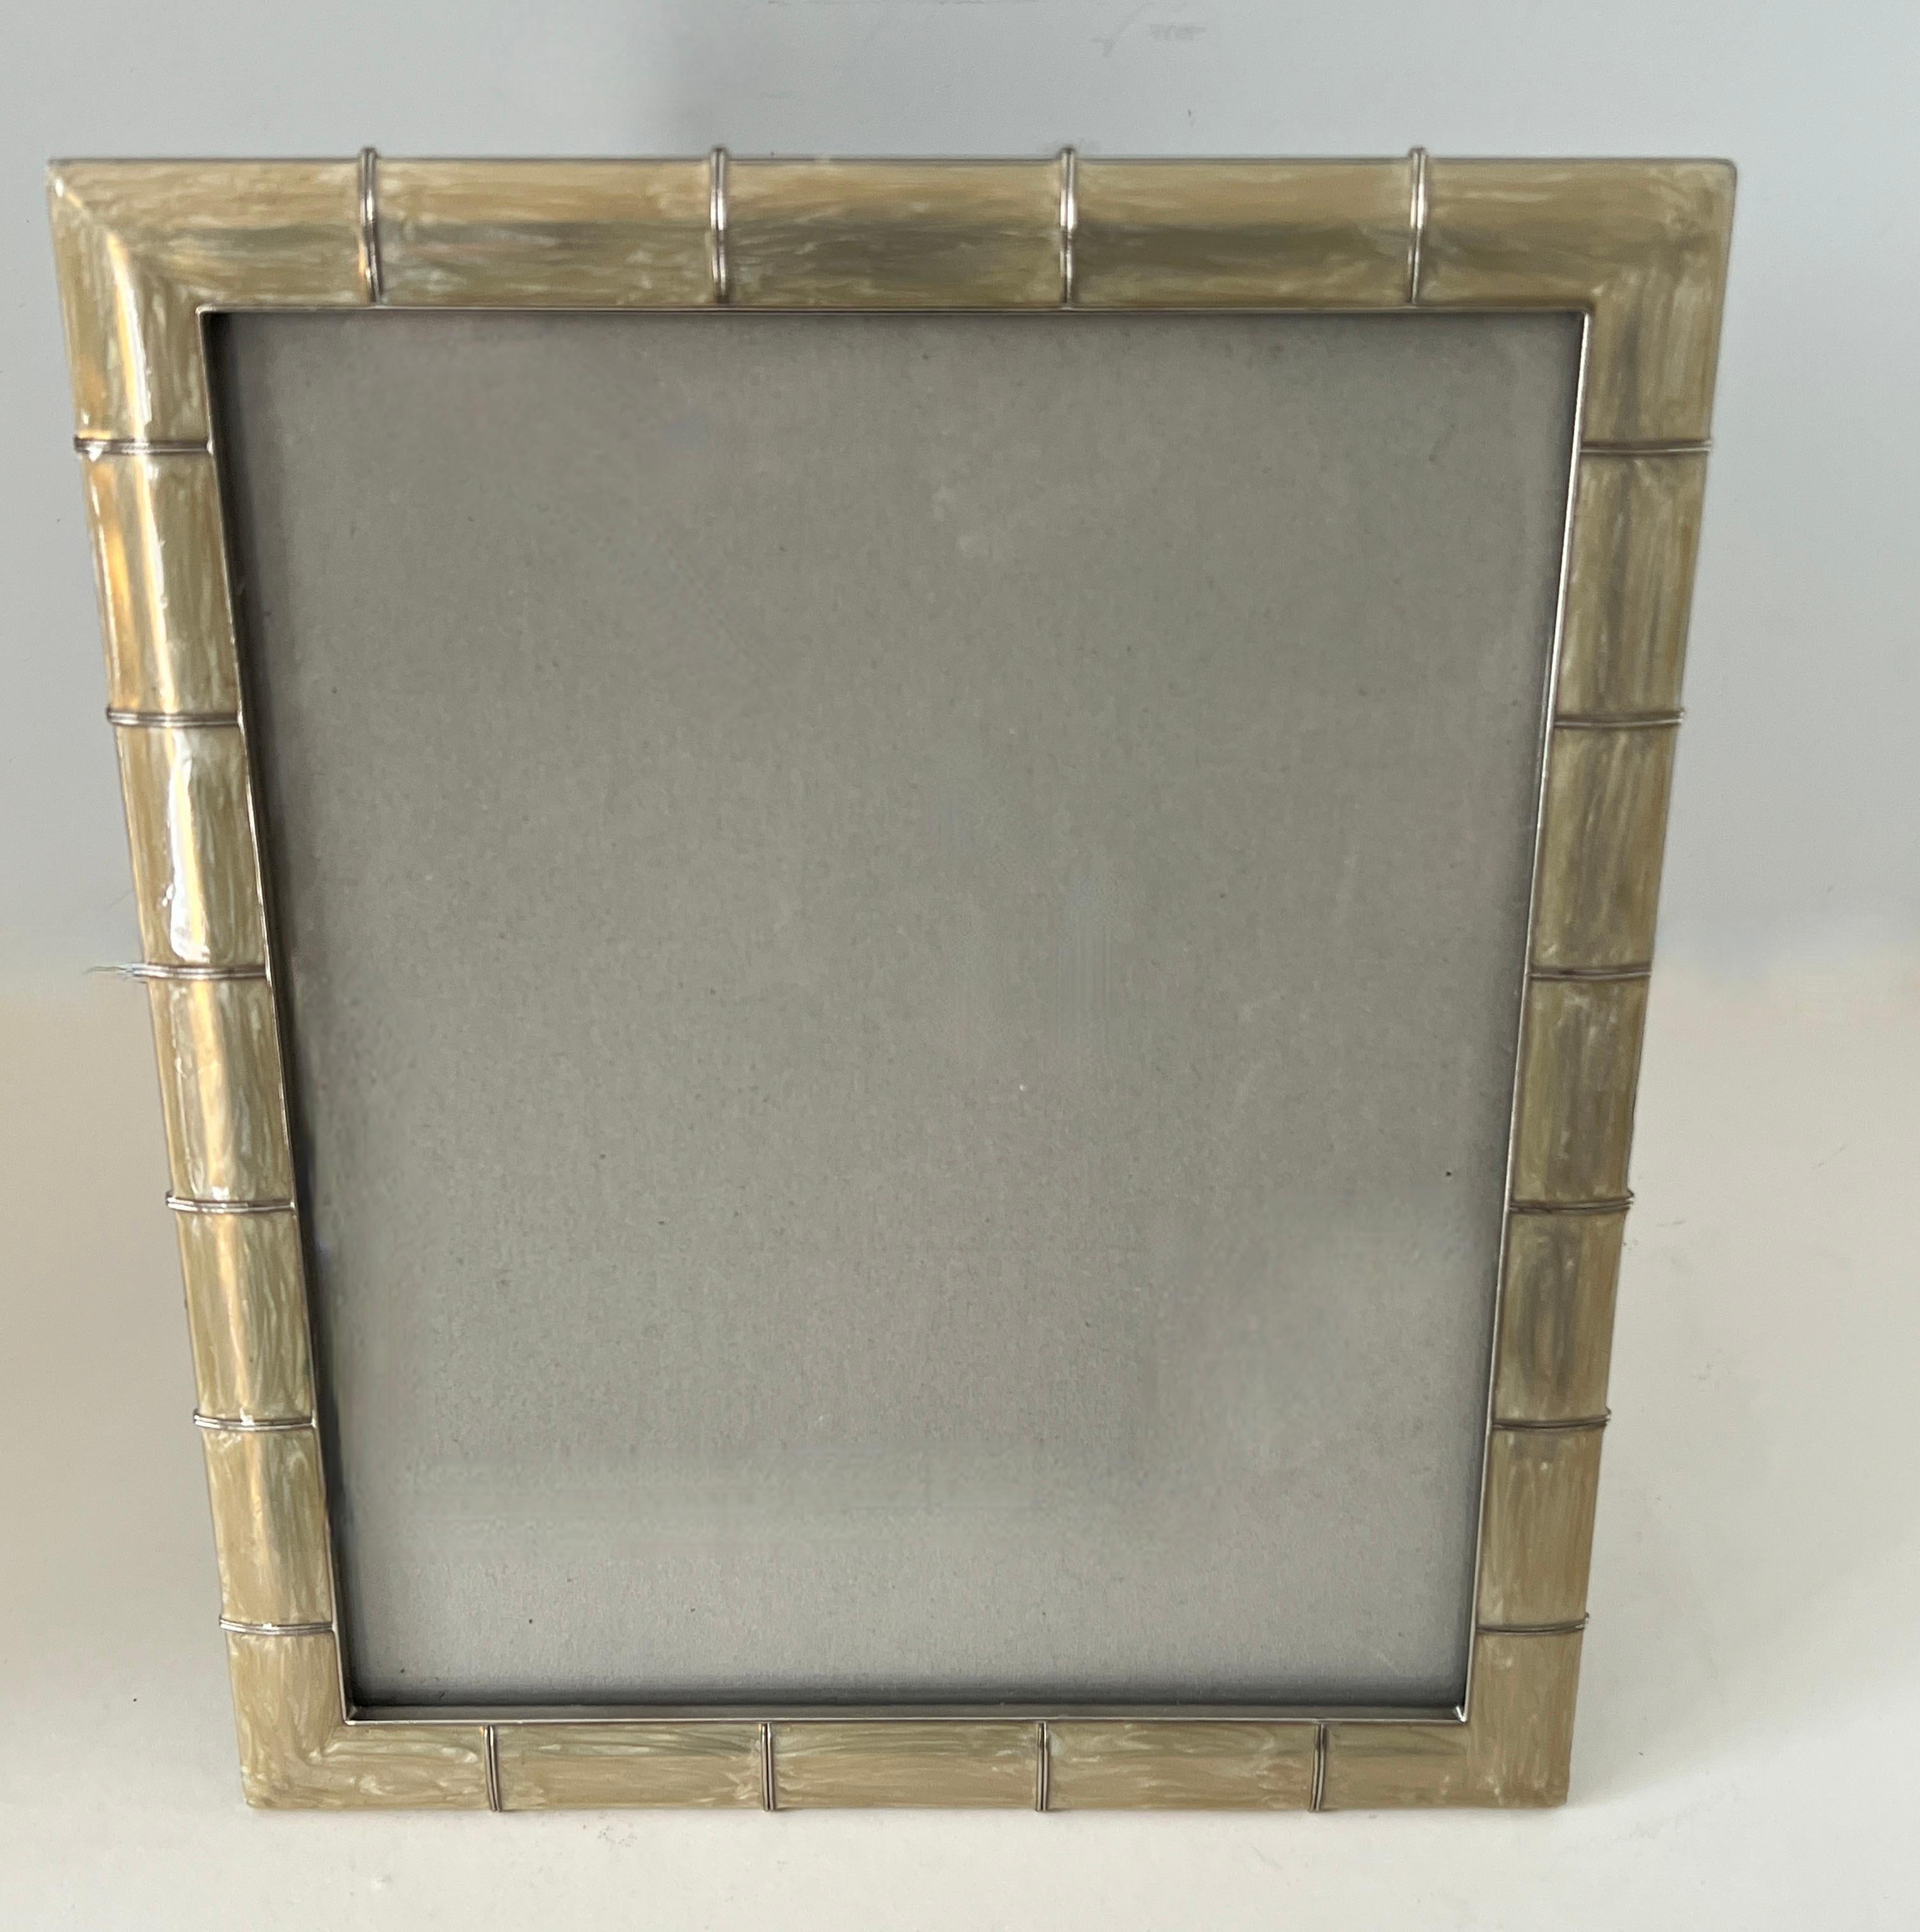 A handsome frame for your 8x10 photos.  The frame is made of an iridescent, almost abalone style material and lends itself to a silver gray material.  A very attractive piece with a black velvet back

A compliment to any story of frames.  designed